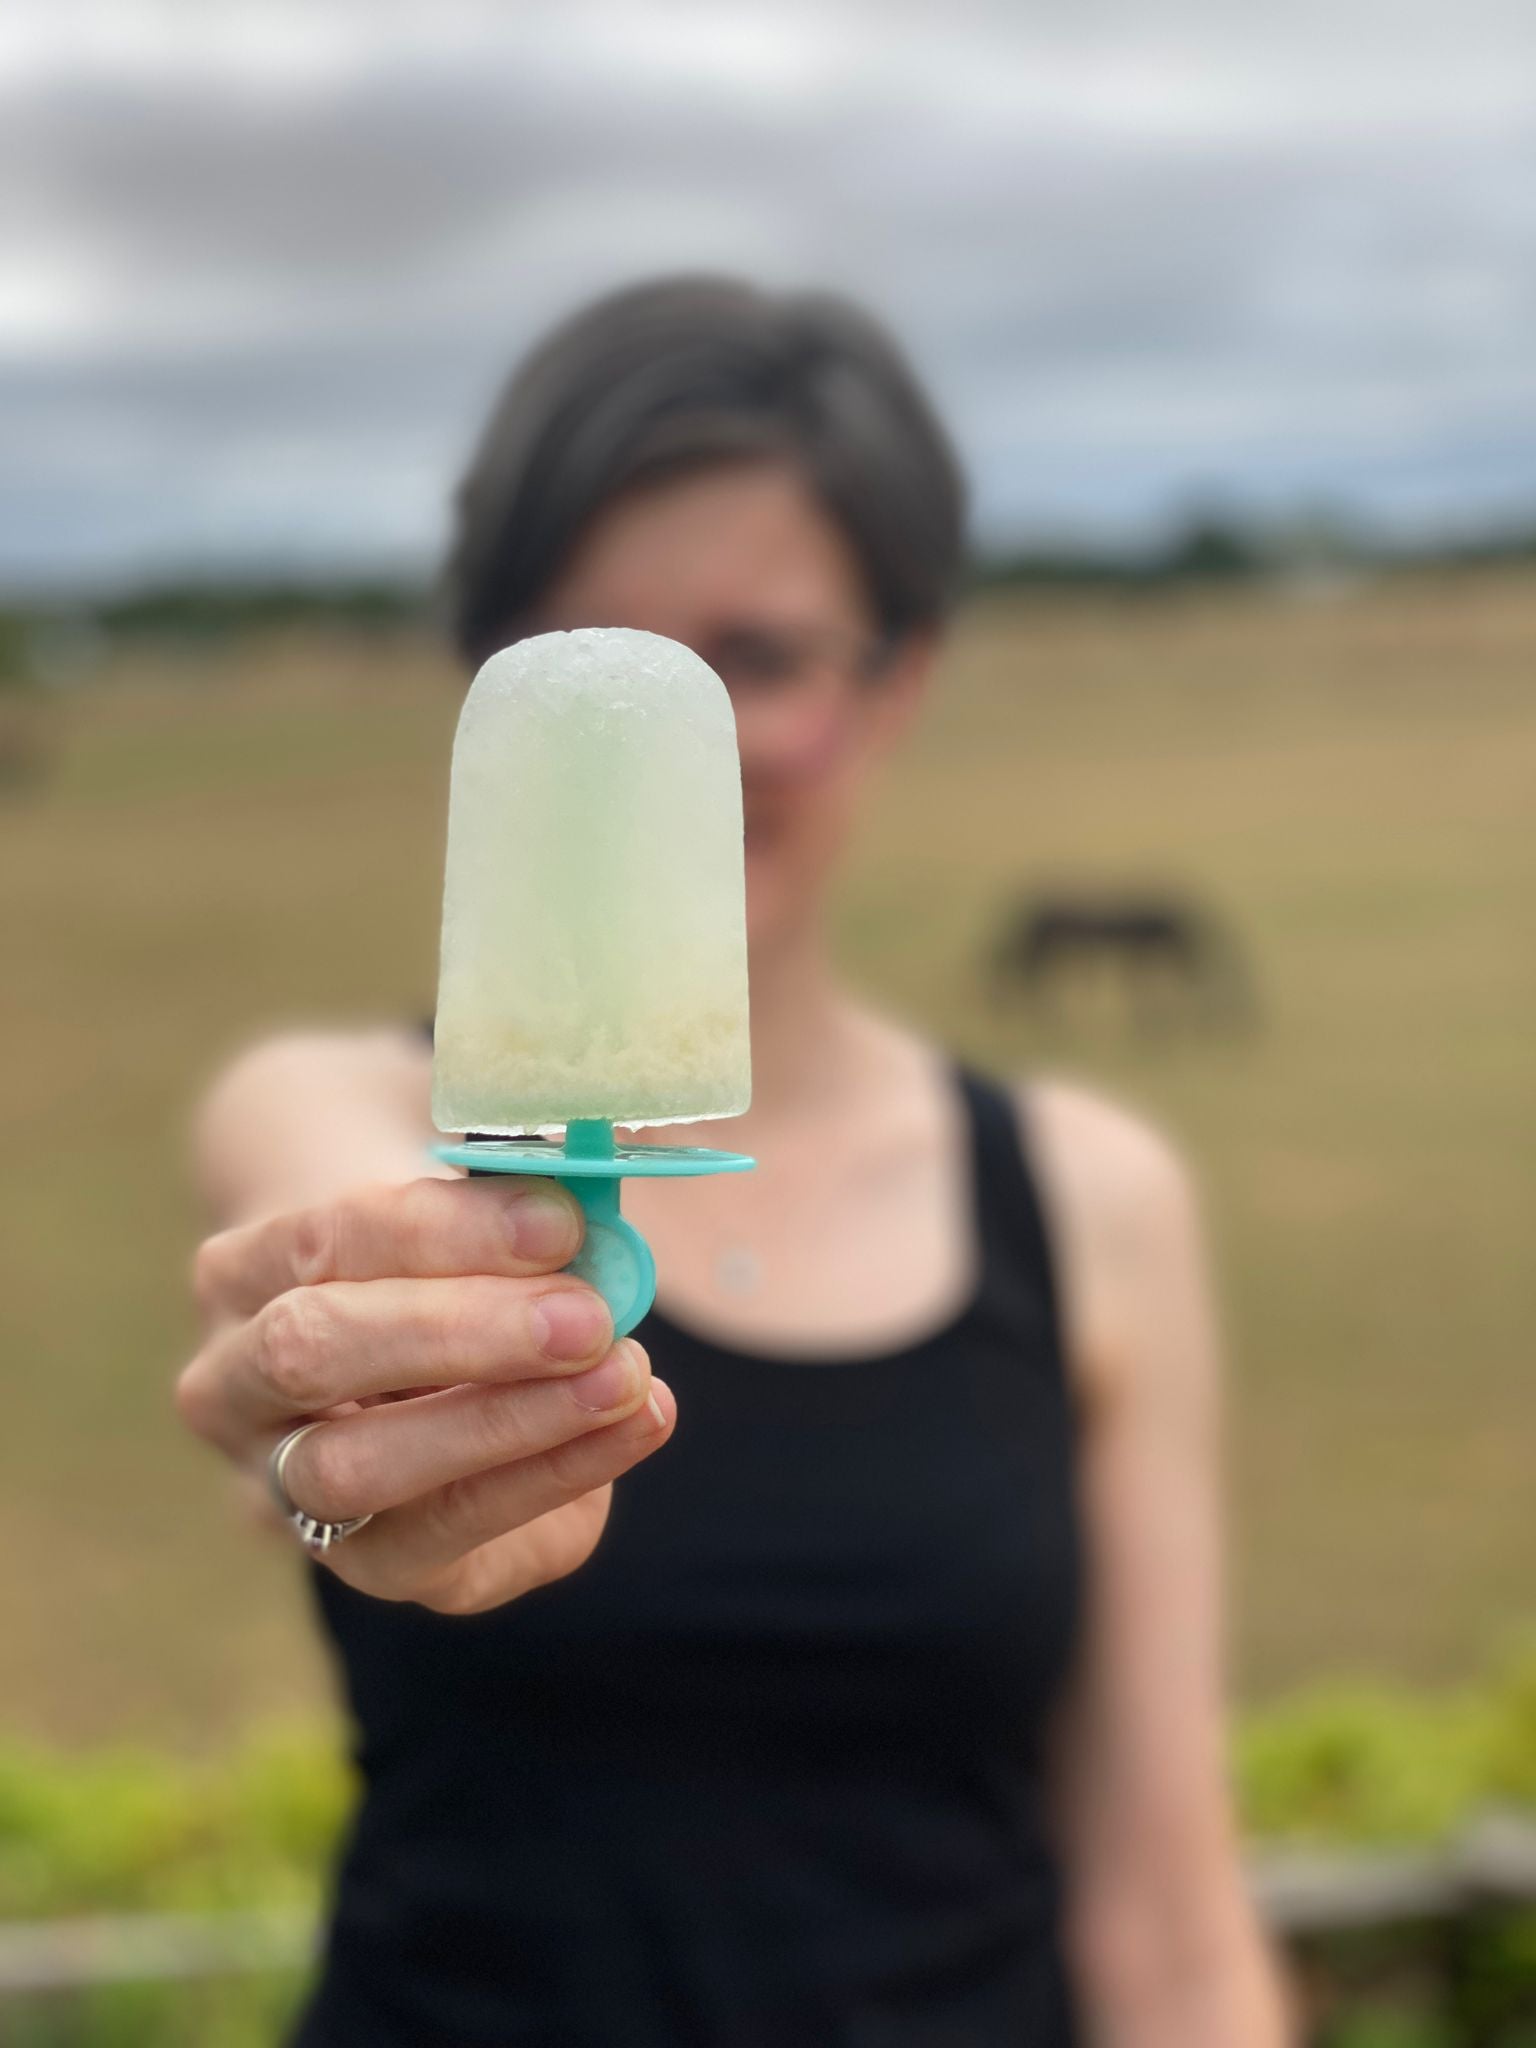 Woman outside holding ice lolly up to camera